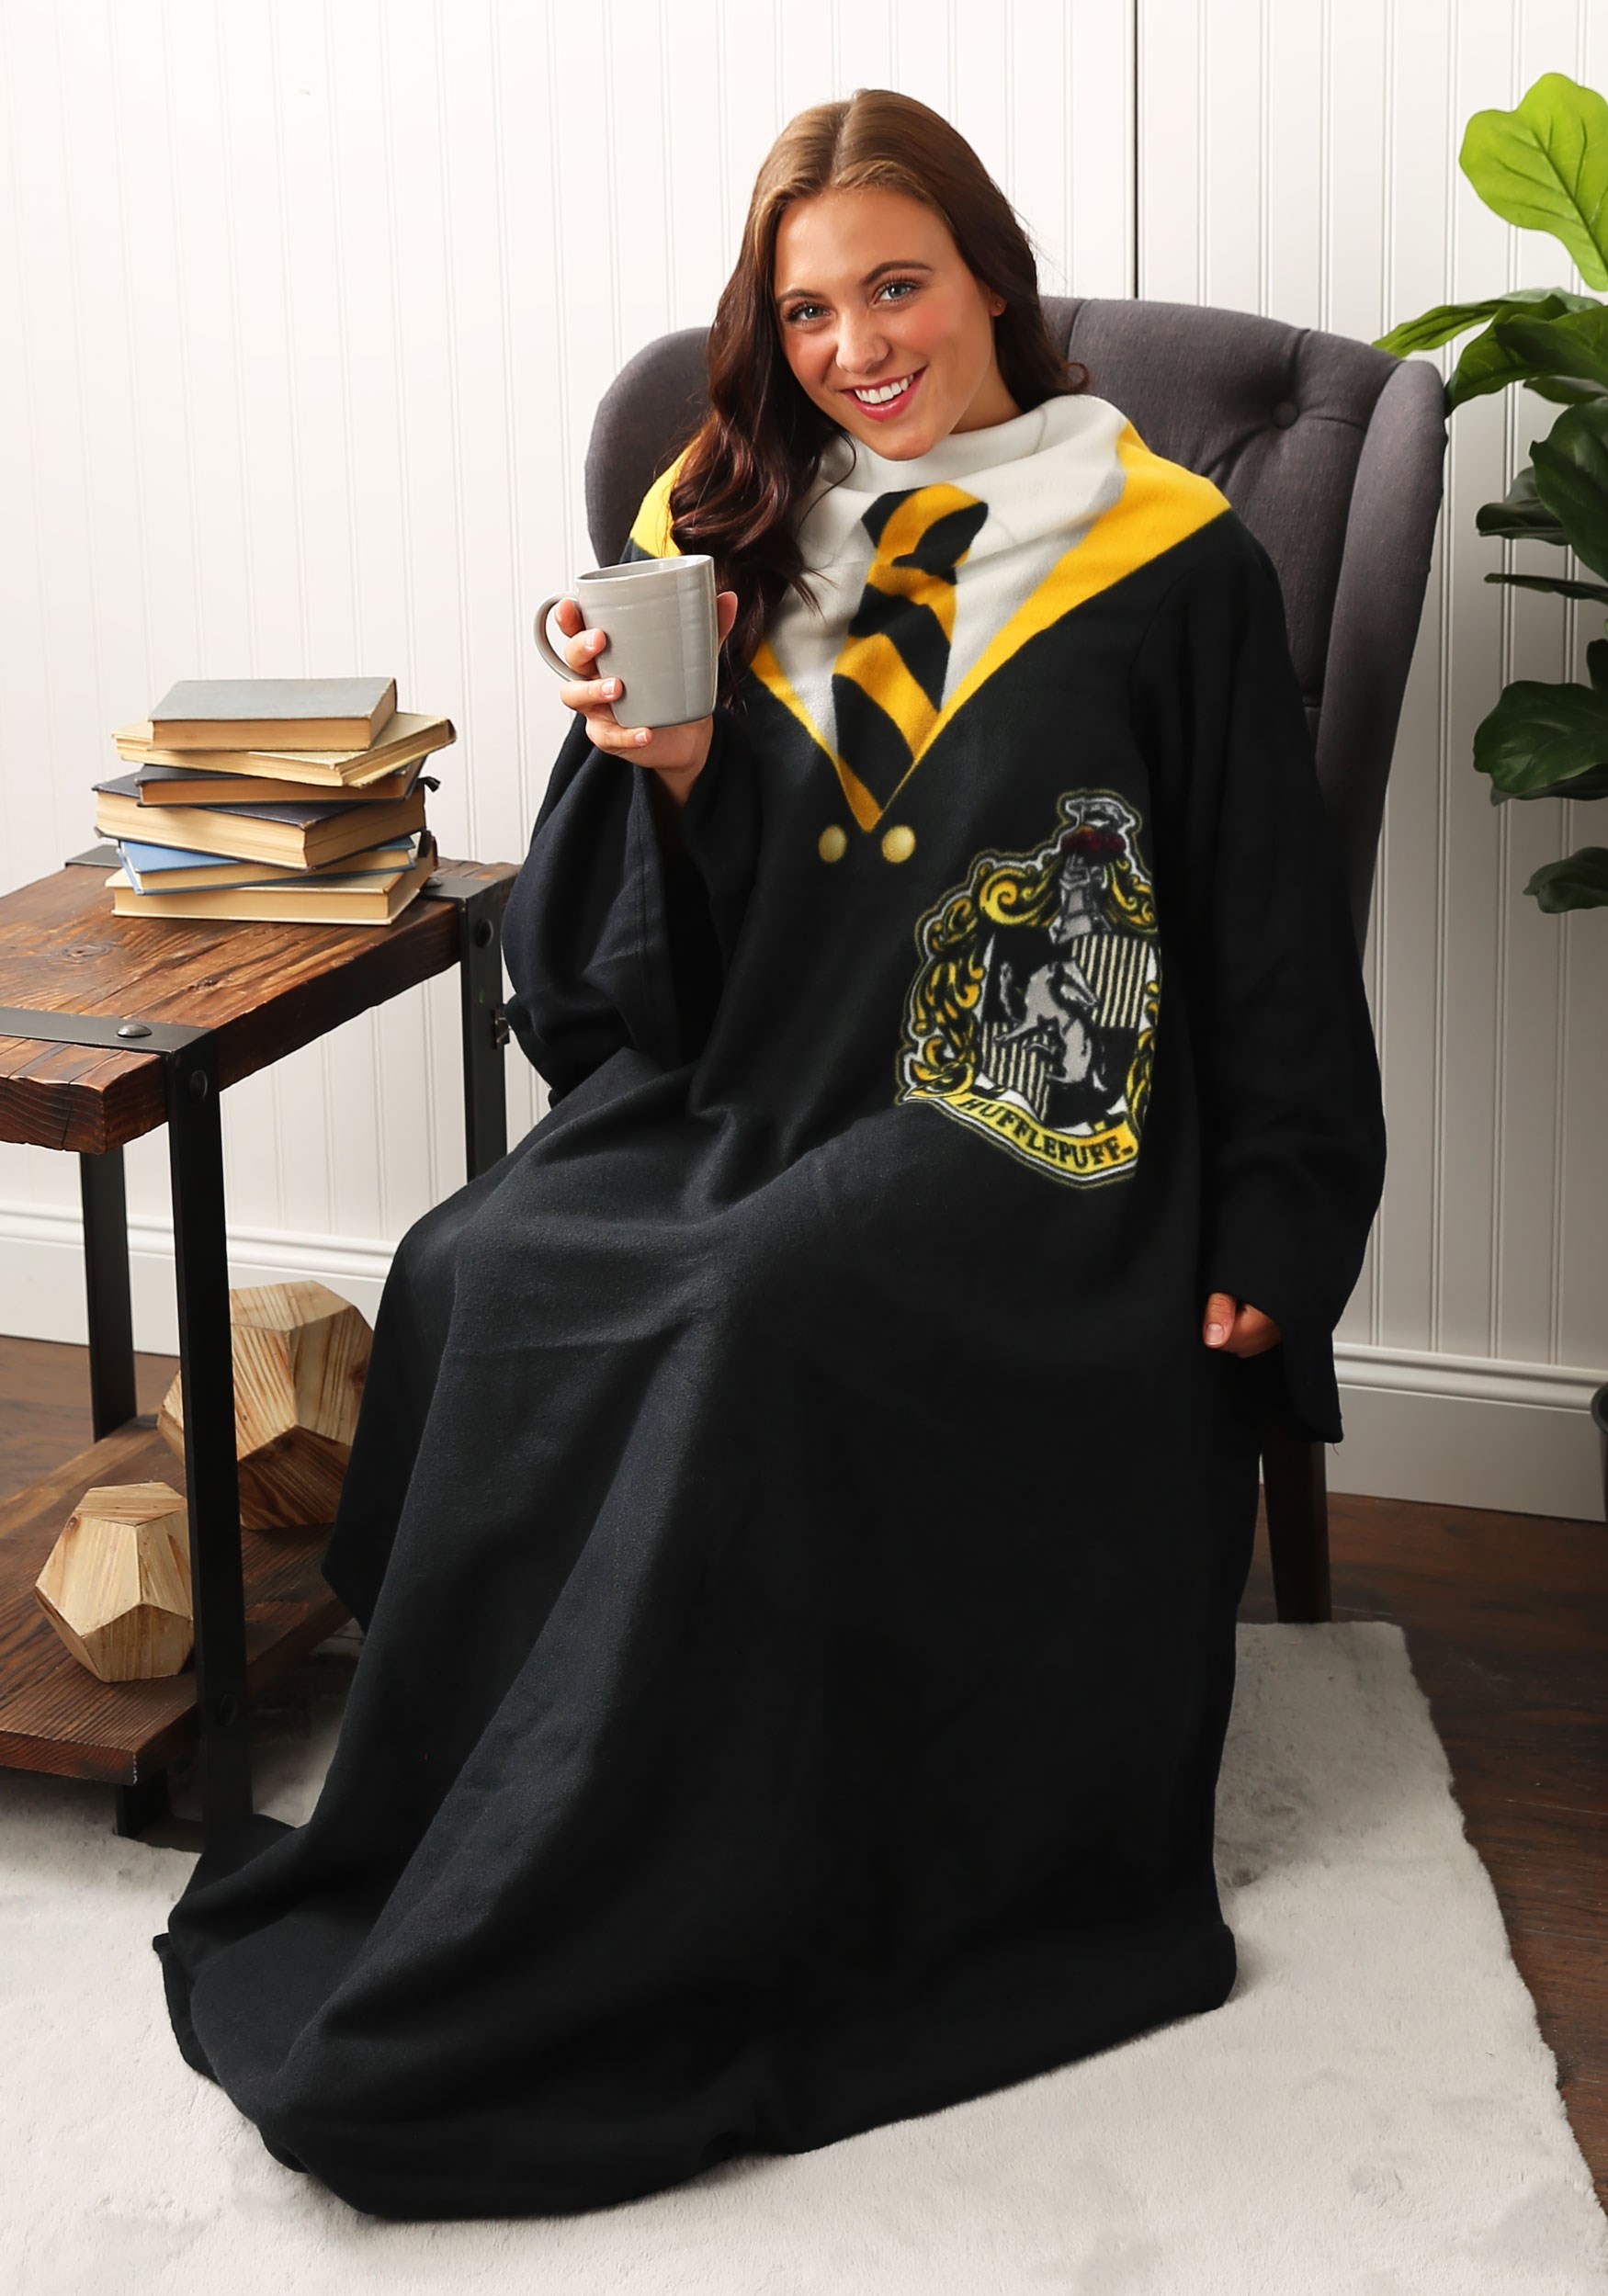 Hufflepuff Shield Woven Tapestry Throw Harry Potter Blanket